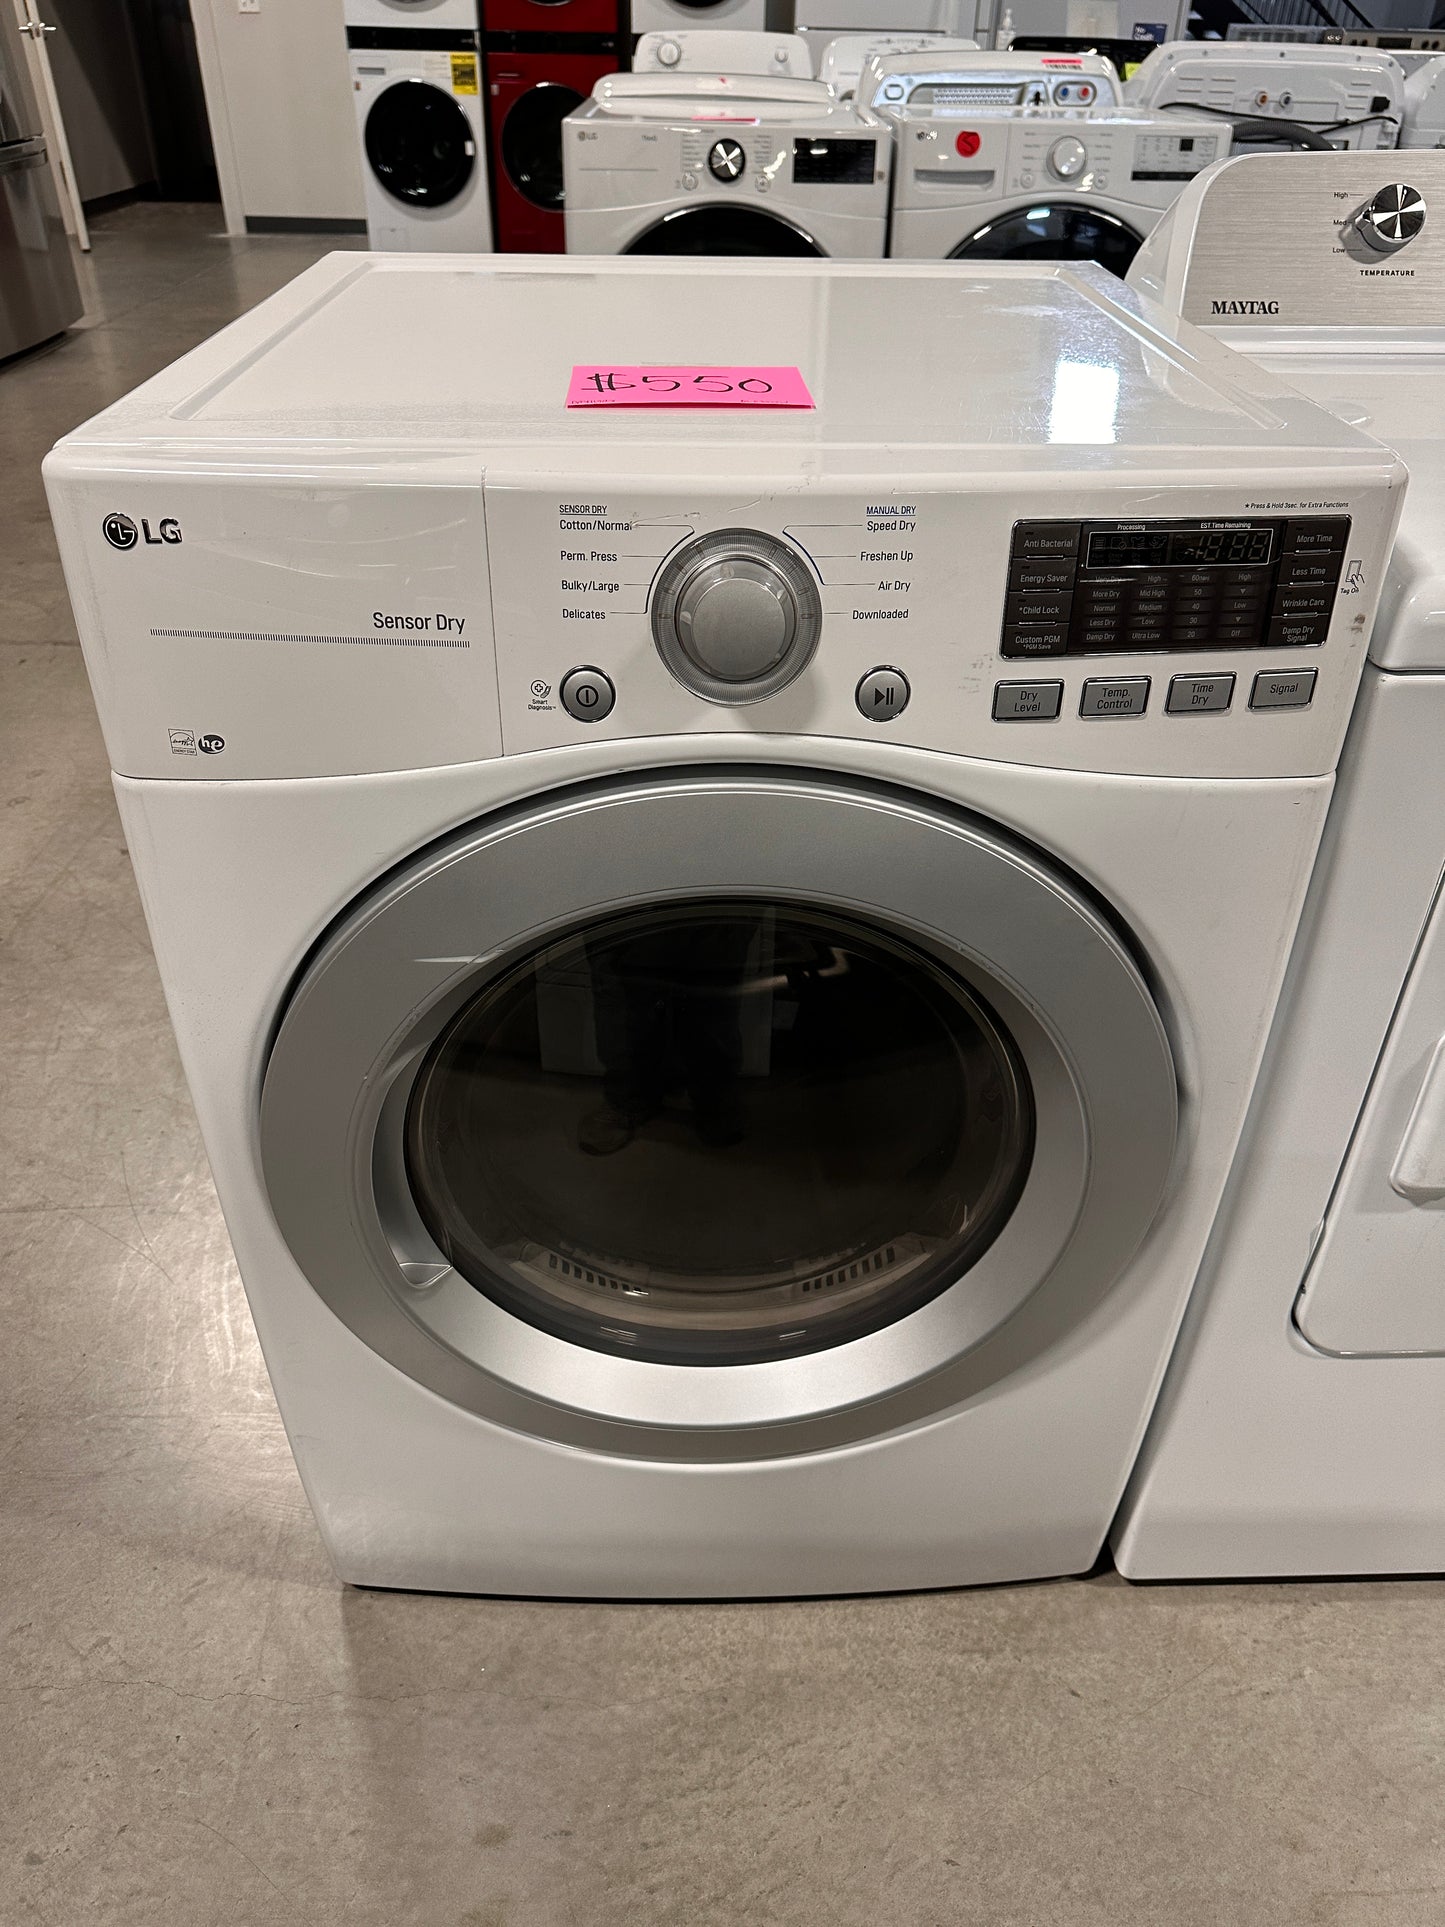 NEW ELECTRIC DRYER WITH SENSOR DRY - DRY11903 DLE3500W